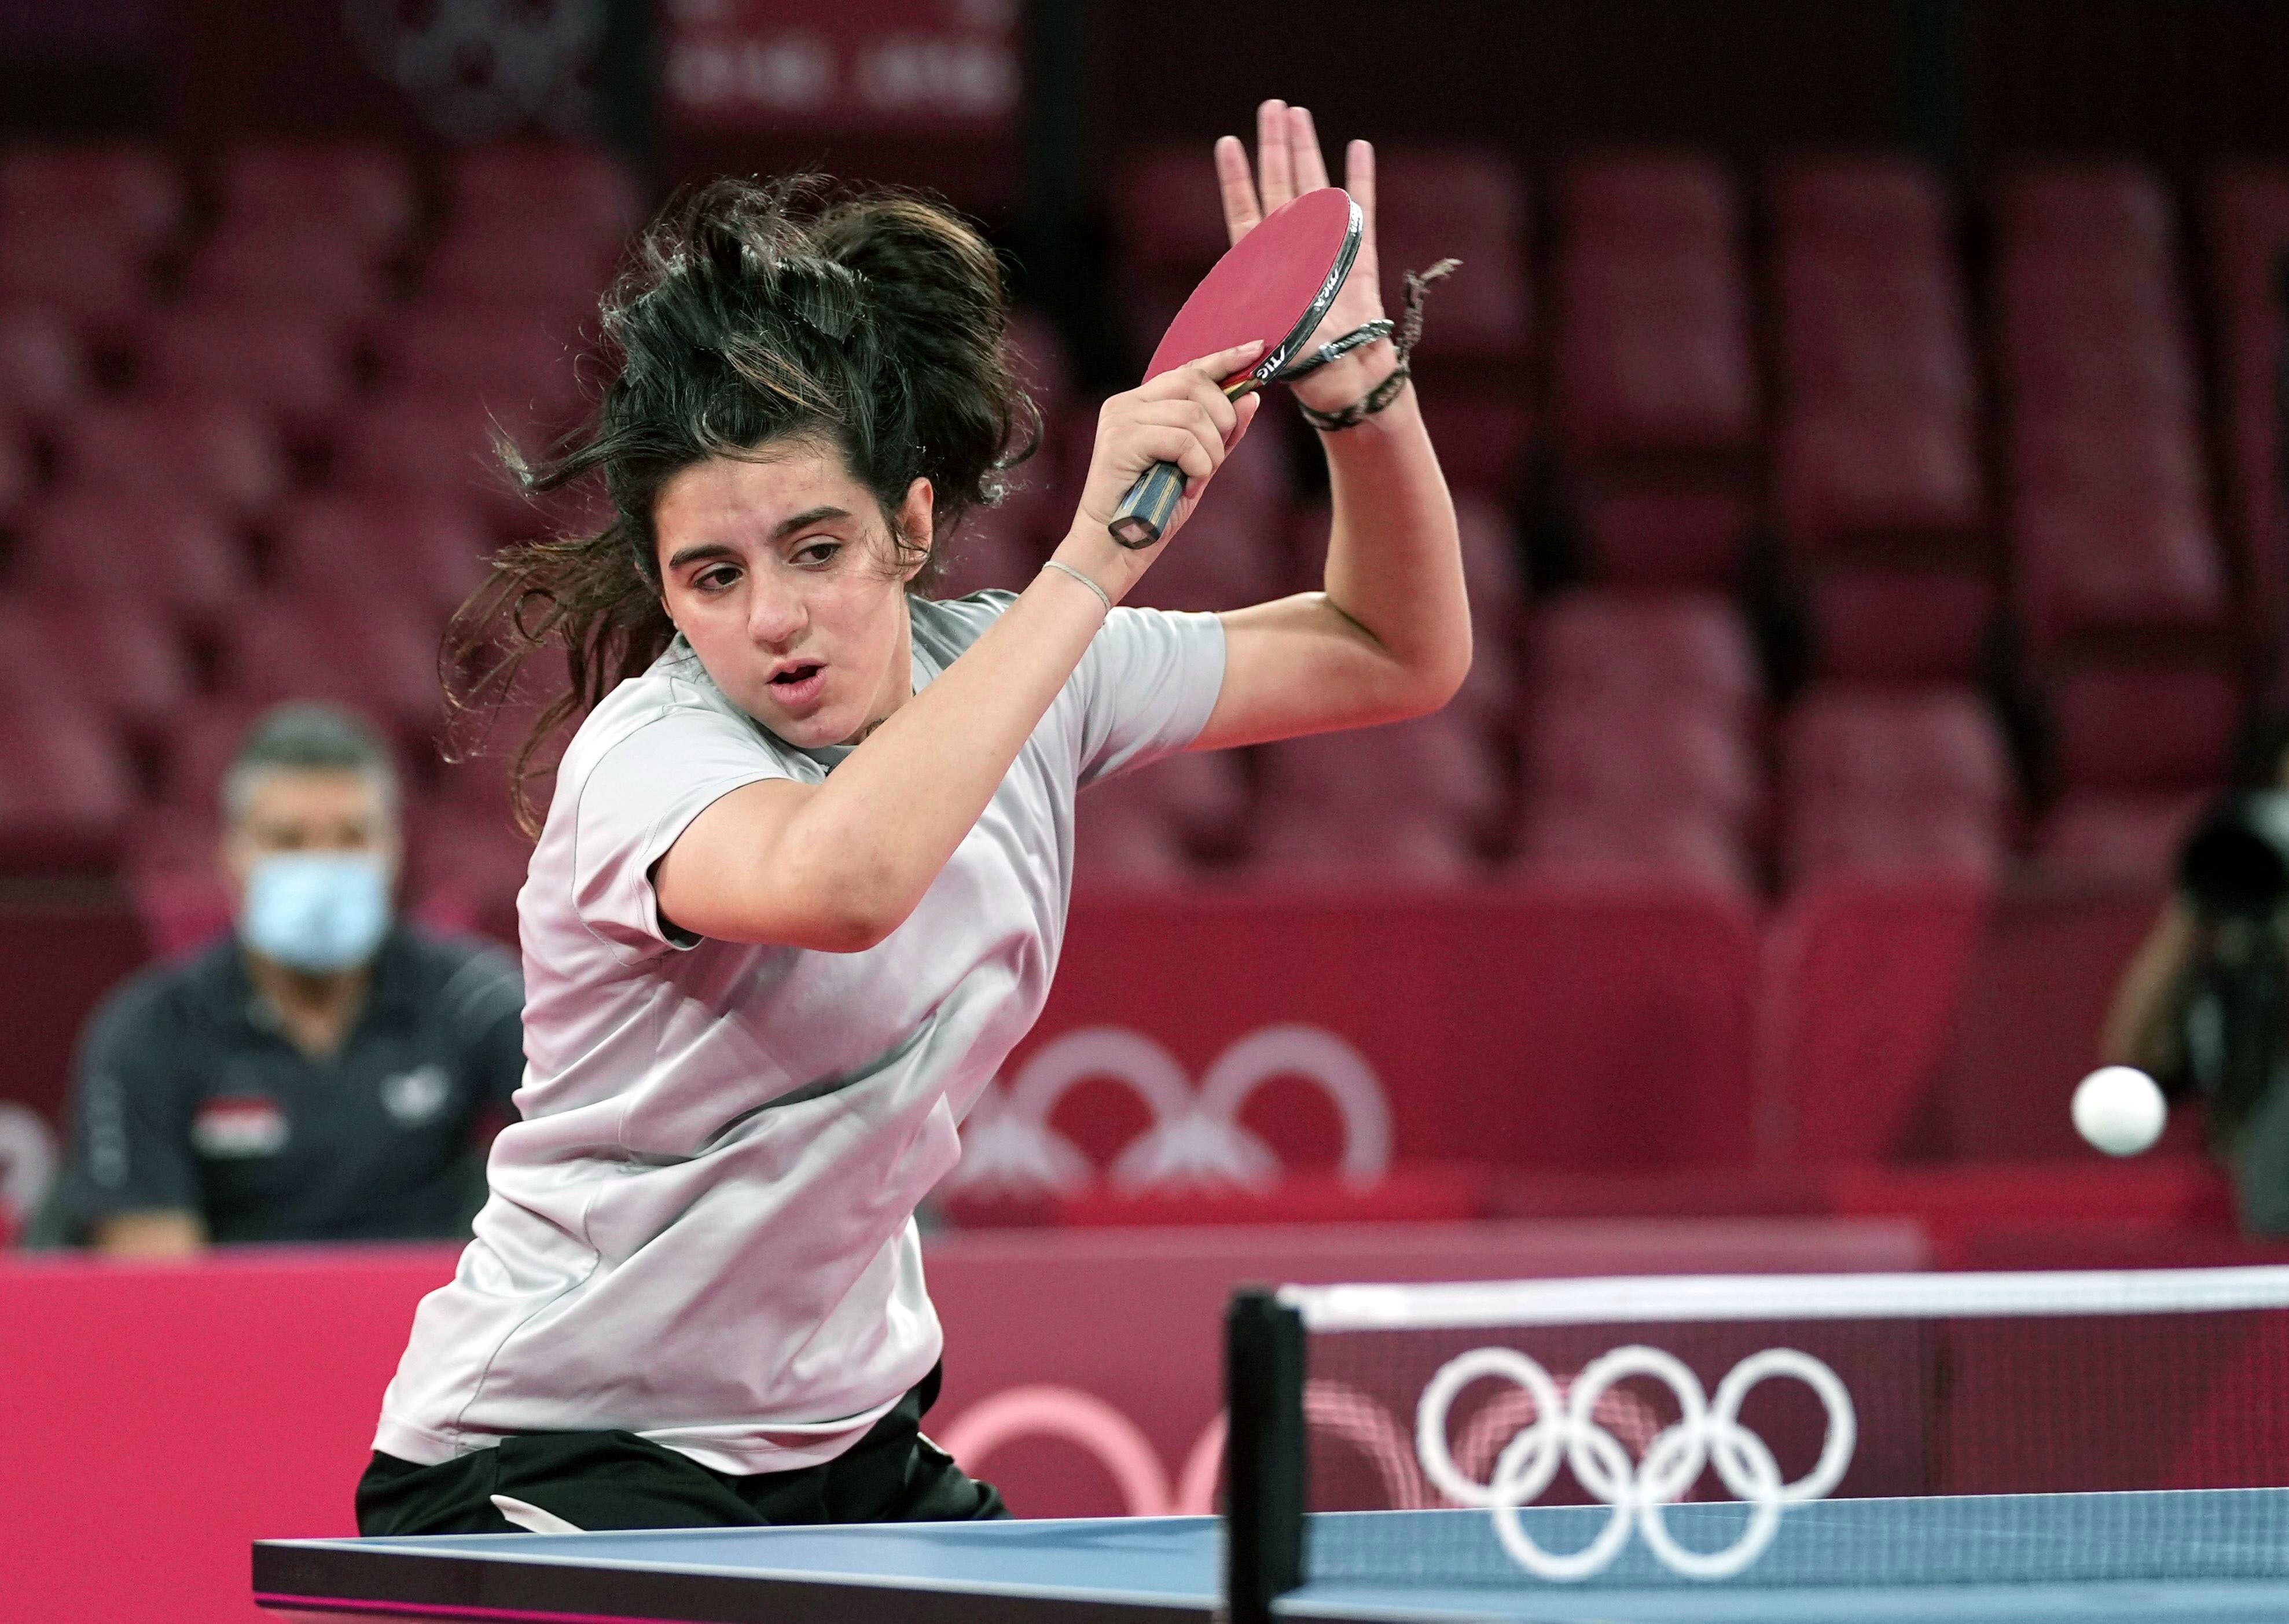 Hend Zaza, the youngest athlete competing in the Tokyo Olympics, in action during the opening round of the women’s table tennis singles on July 24. Photo: Kyodo